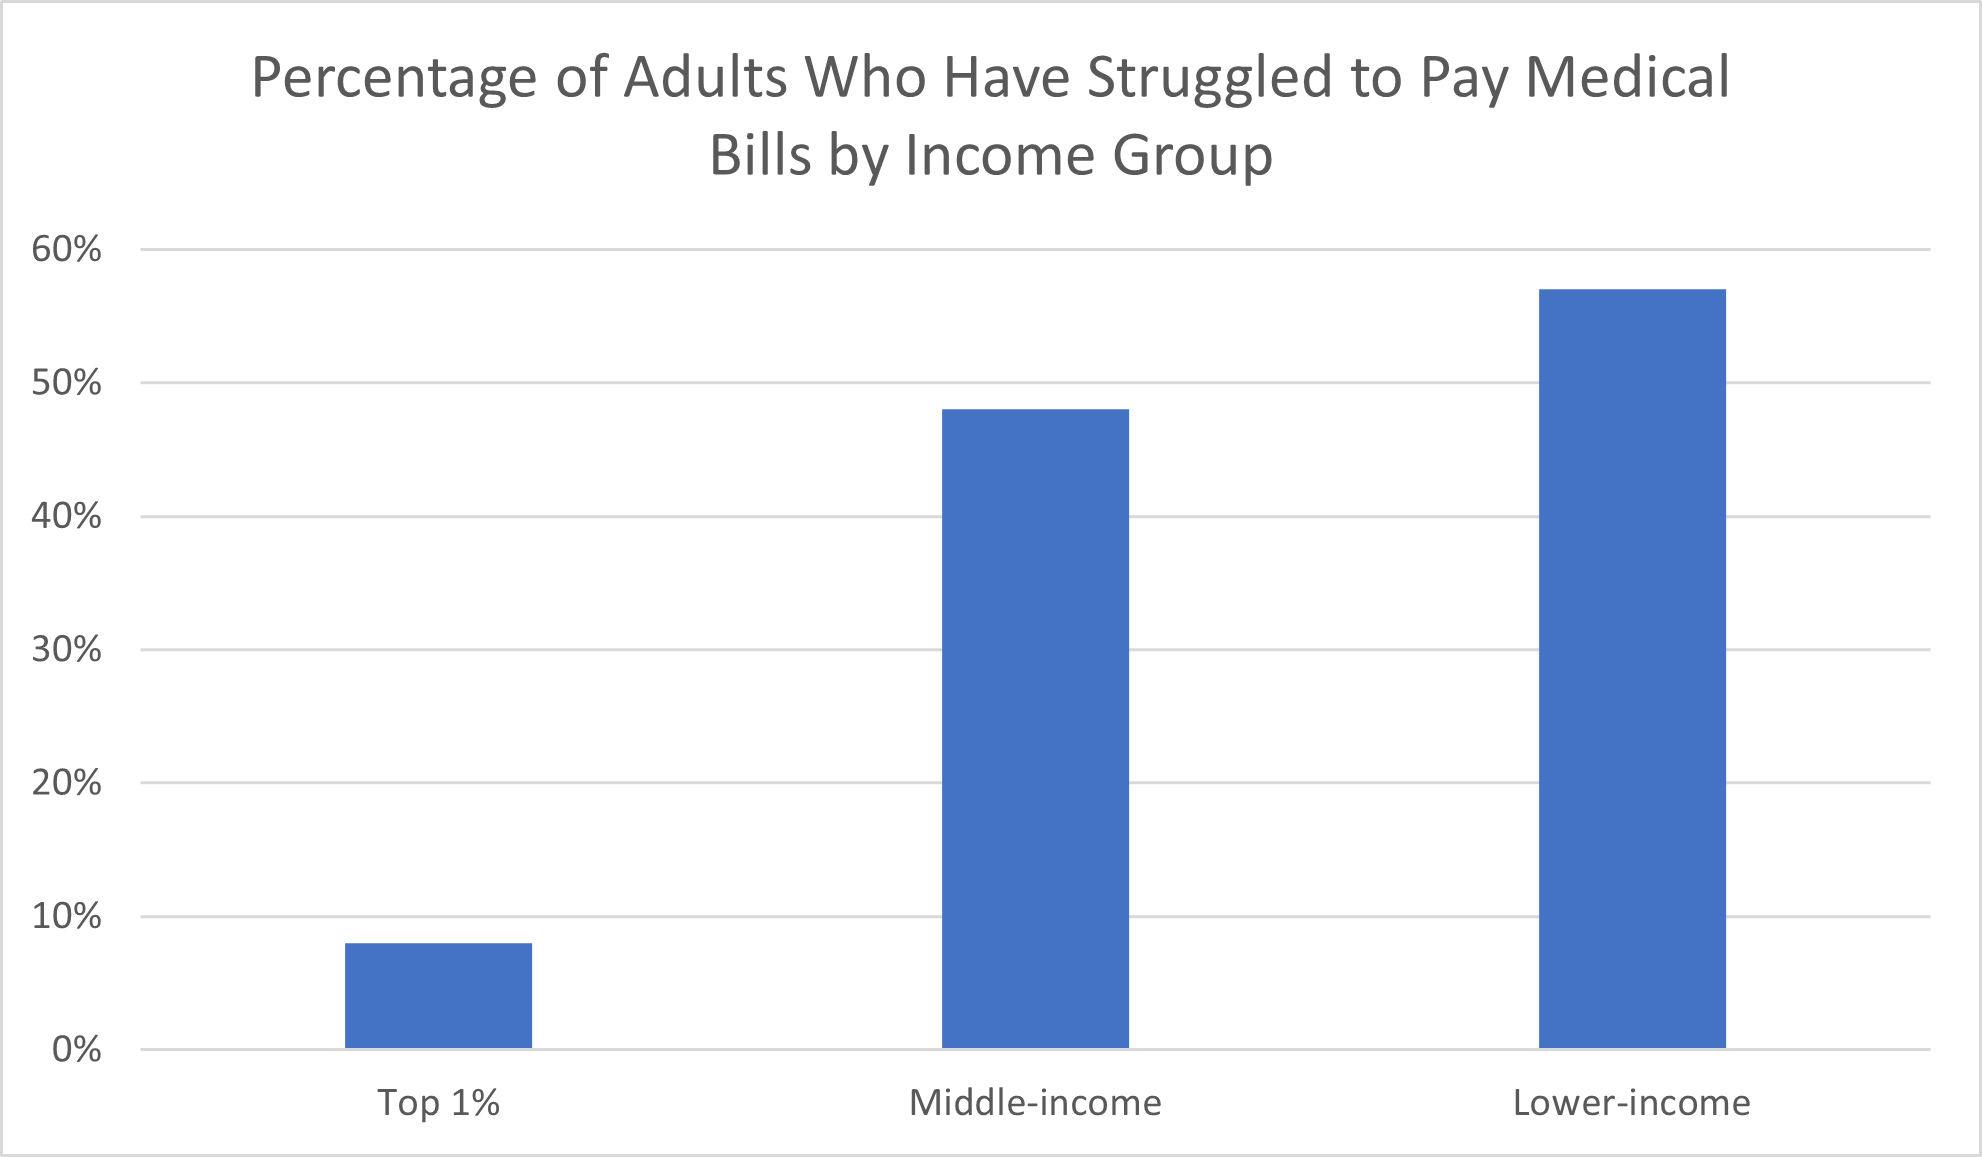 Percentage of Adults Who Have Struggled to Pay Medical Bills by Income Group